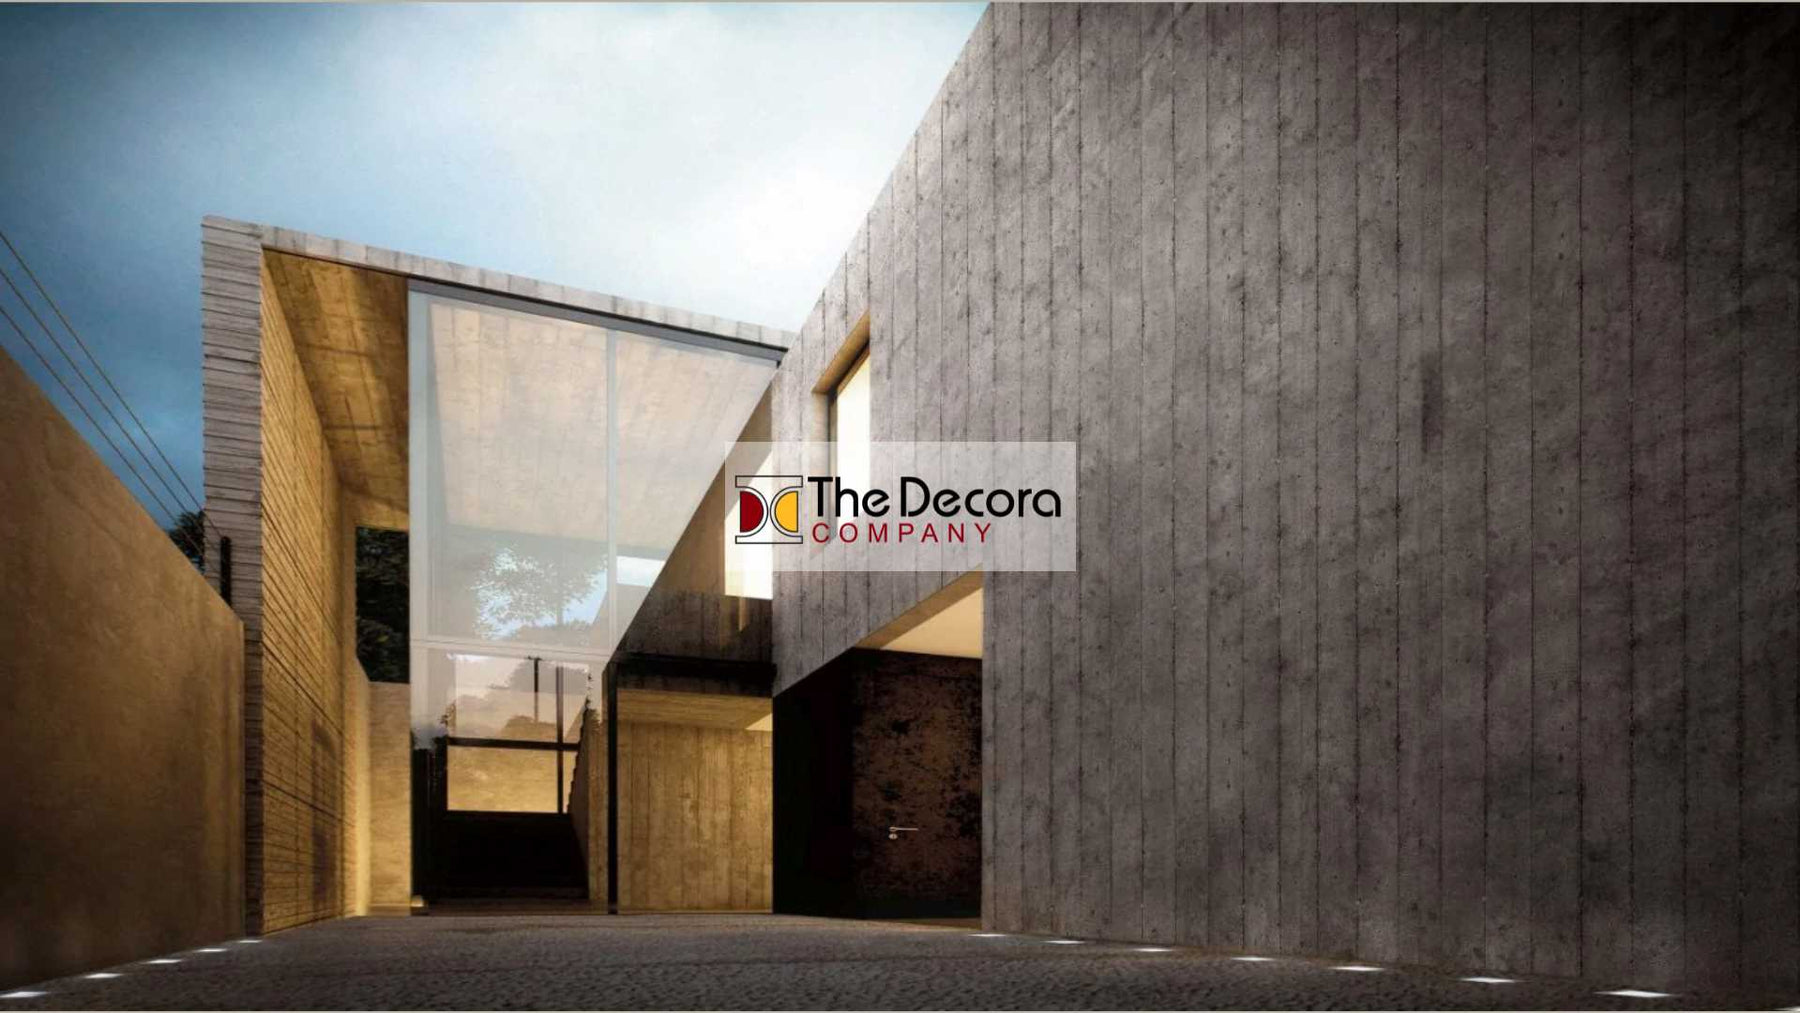 Types of Decorative Plaster Finishes The Decora Company